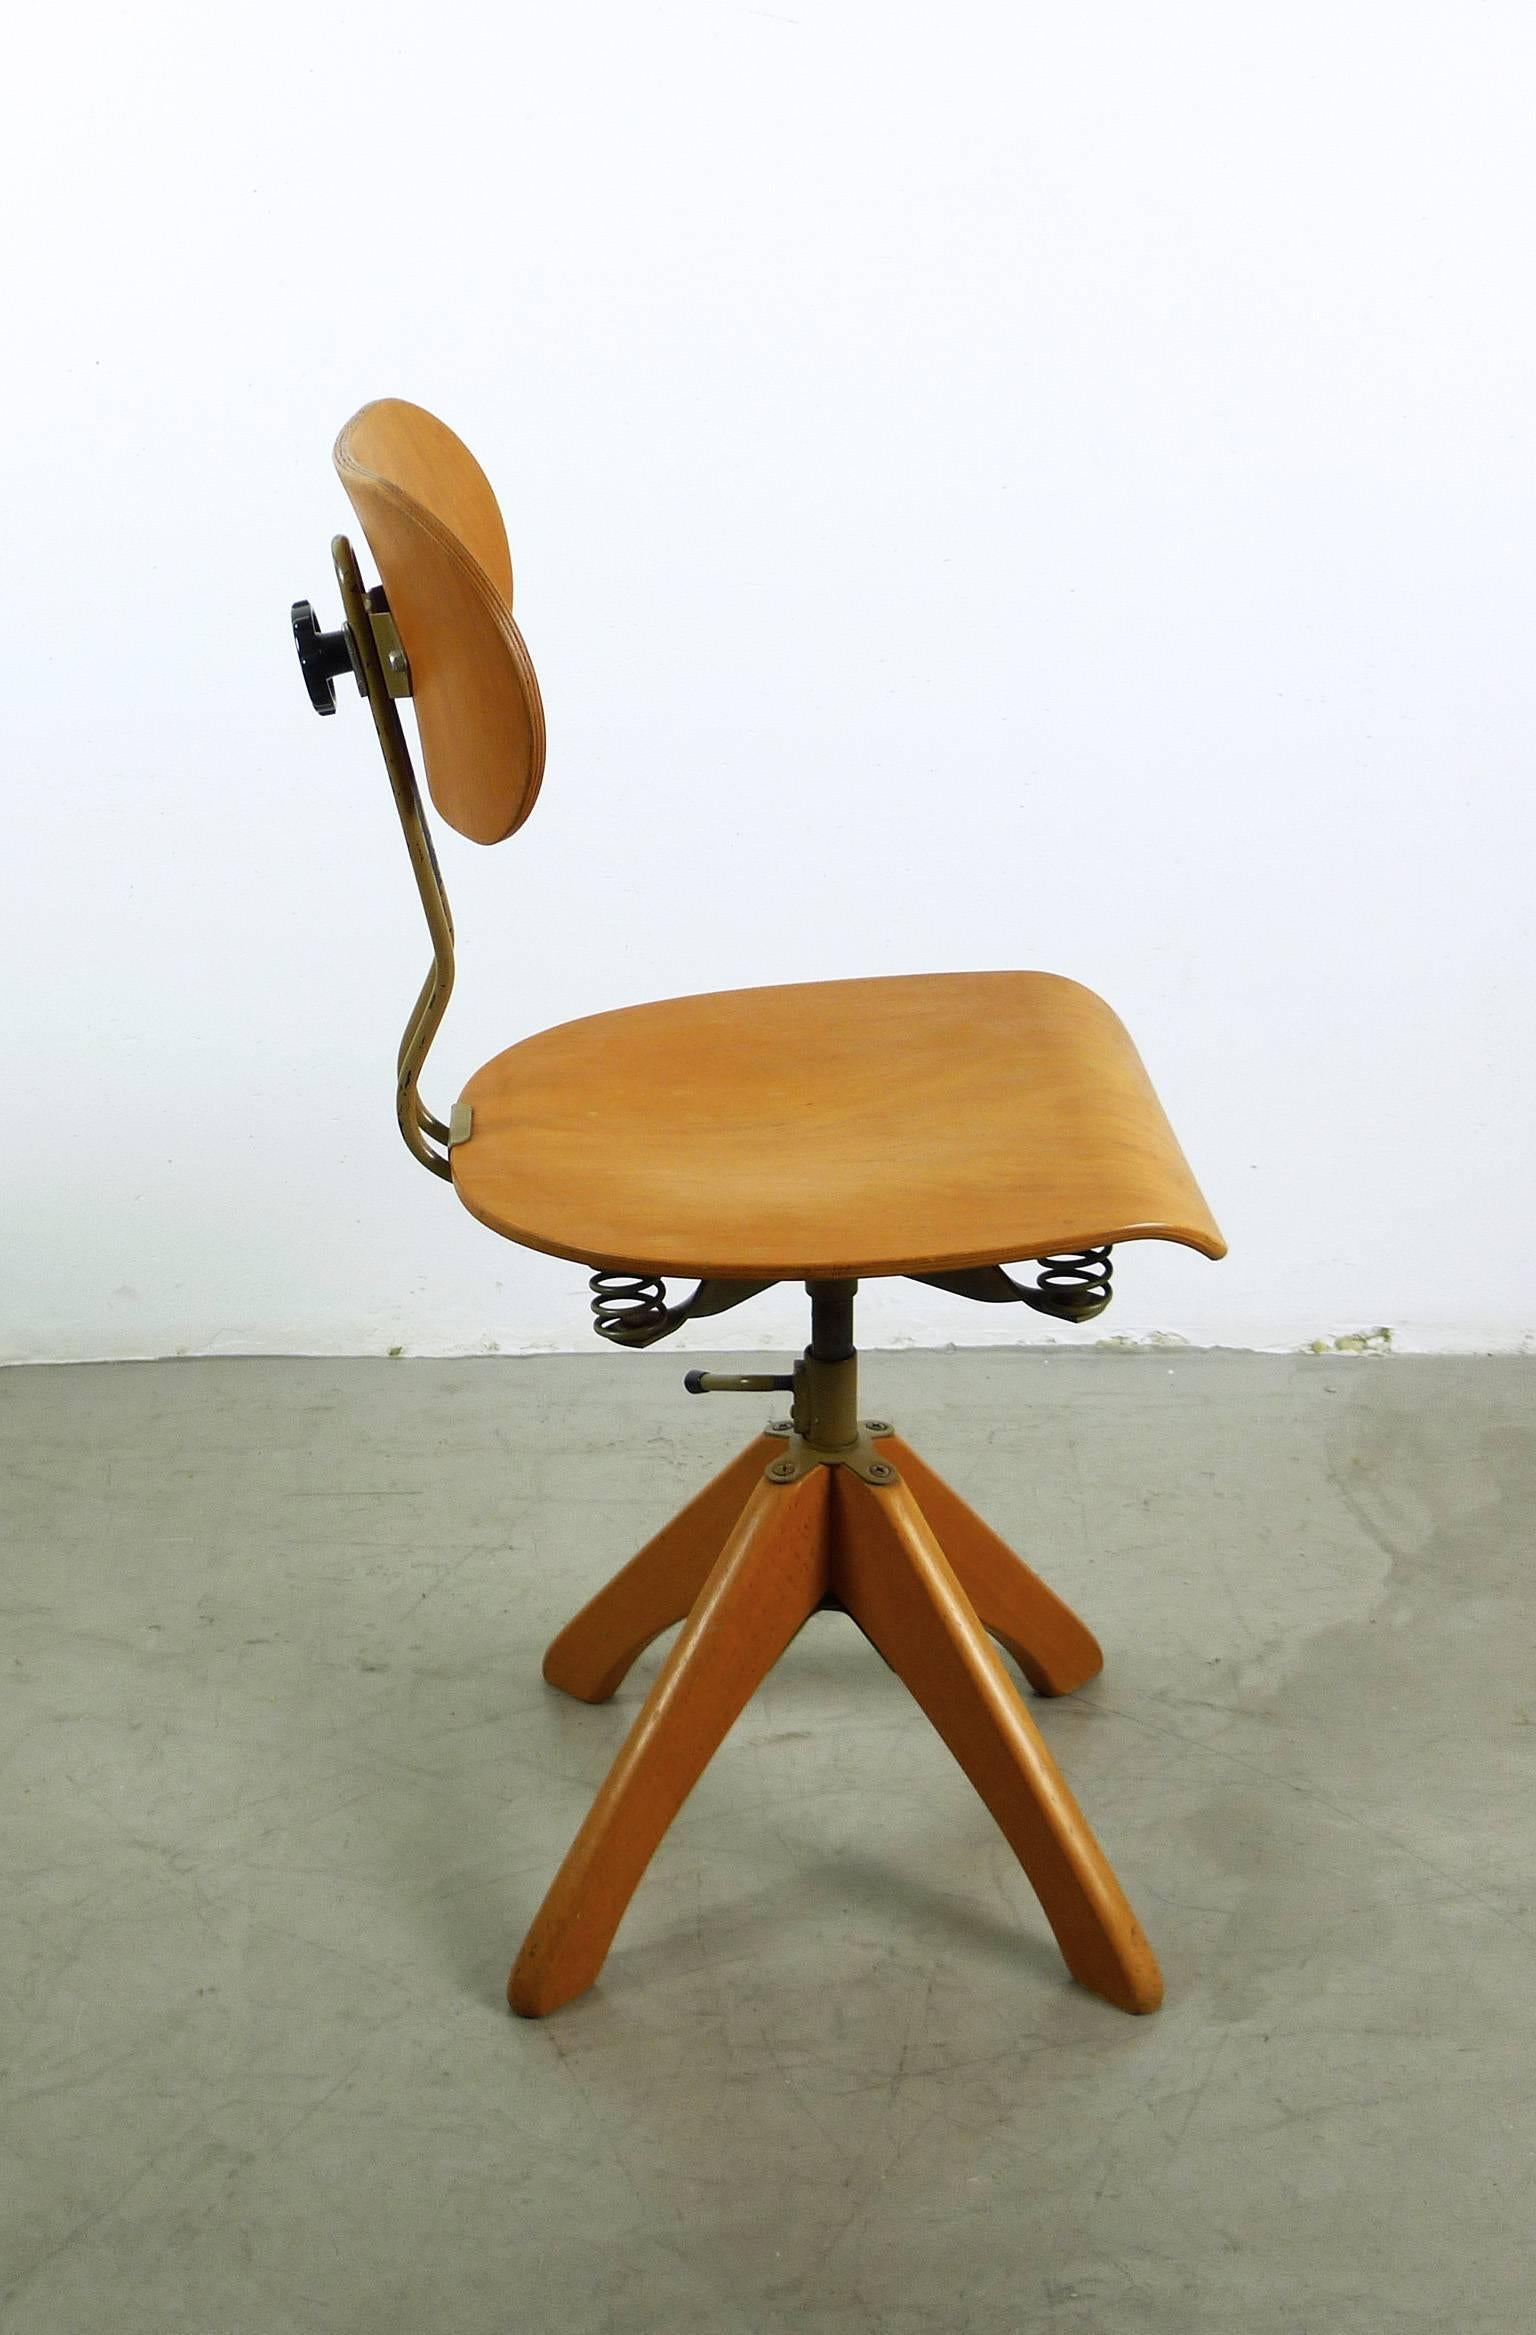 Industrial Architects Chair by Margarete Klöber for Polstergleich, Germany, 1930s